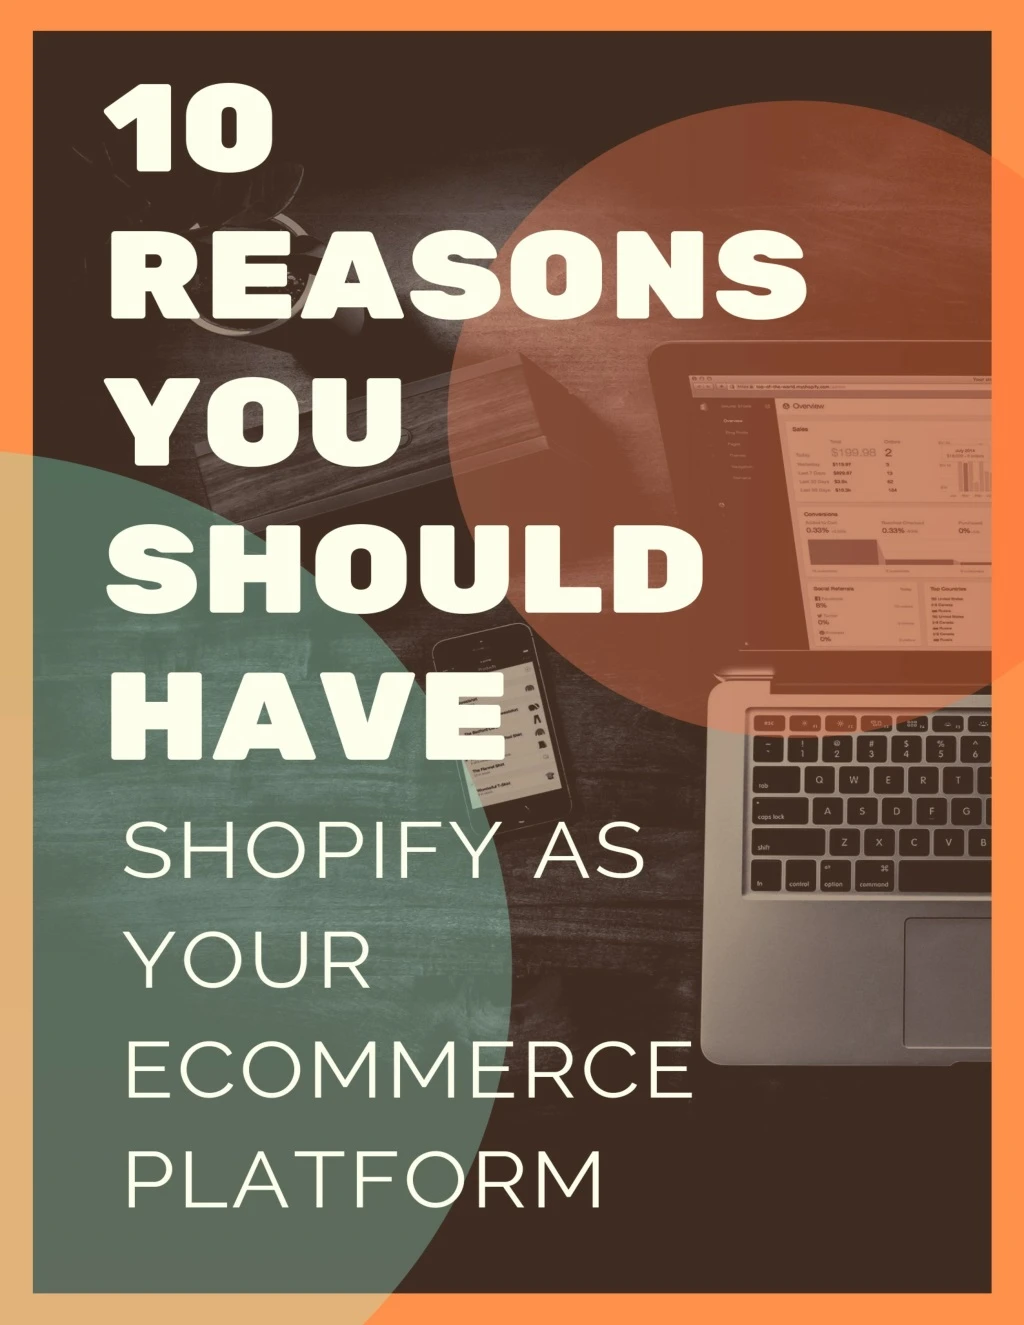 10 reasons you should have shopify as your